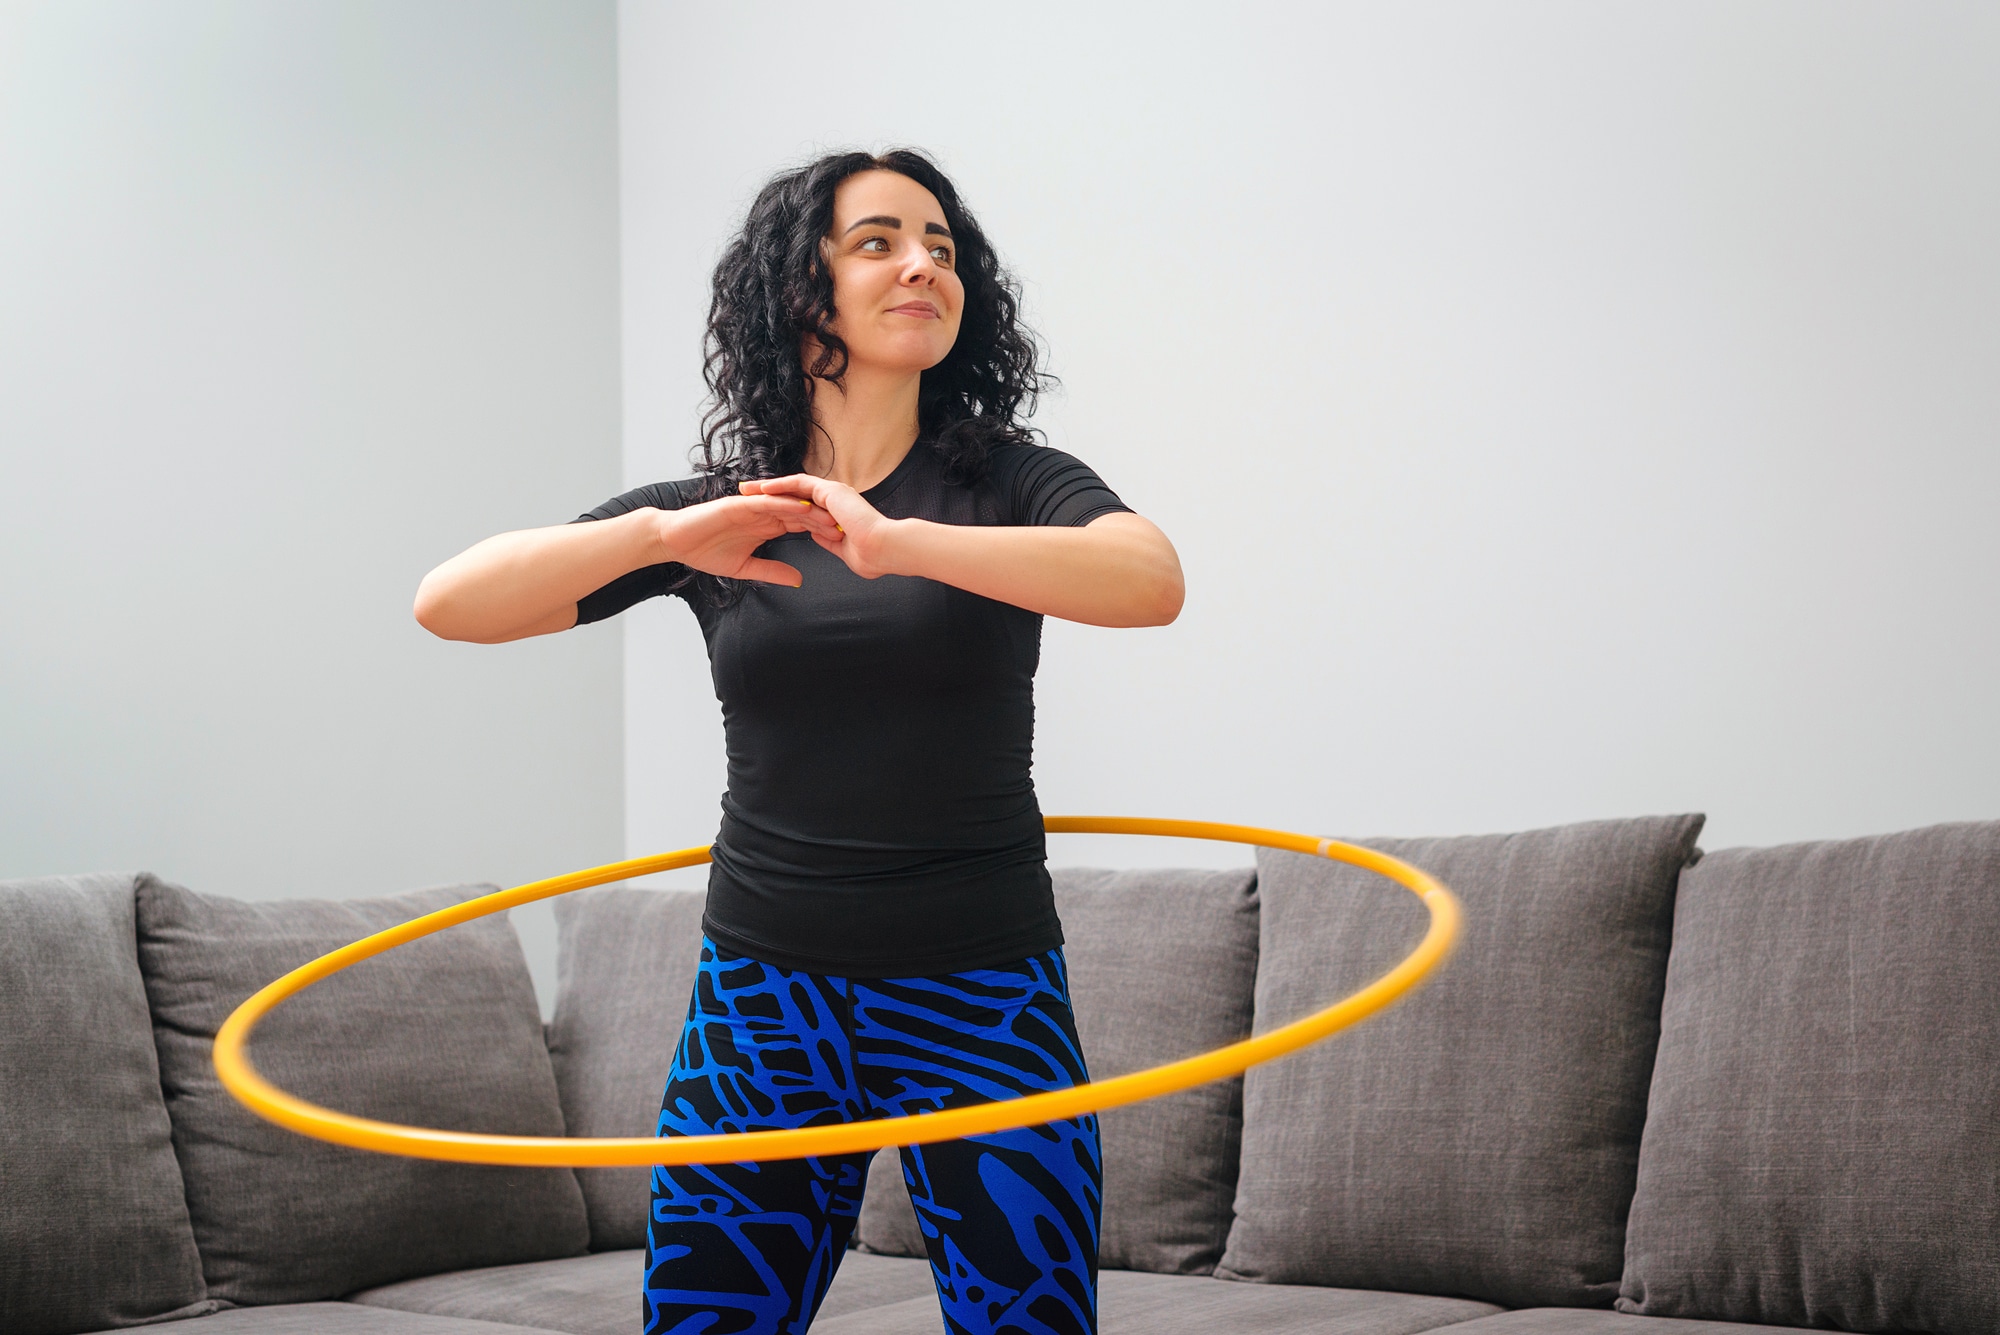 Woman exercising using a weighted hula hoop in her living room.